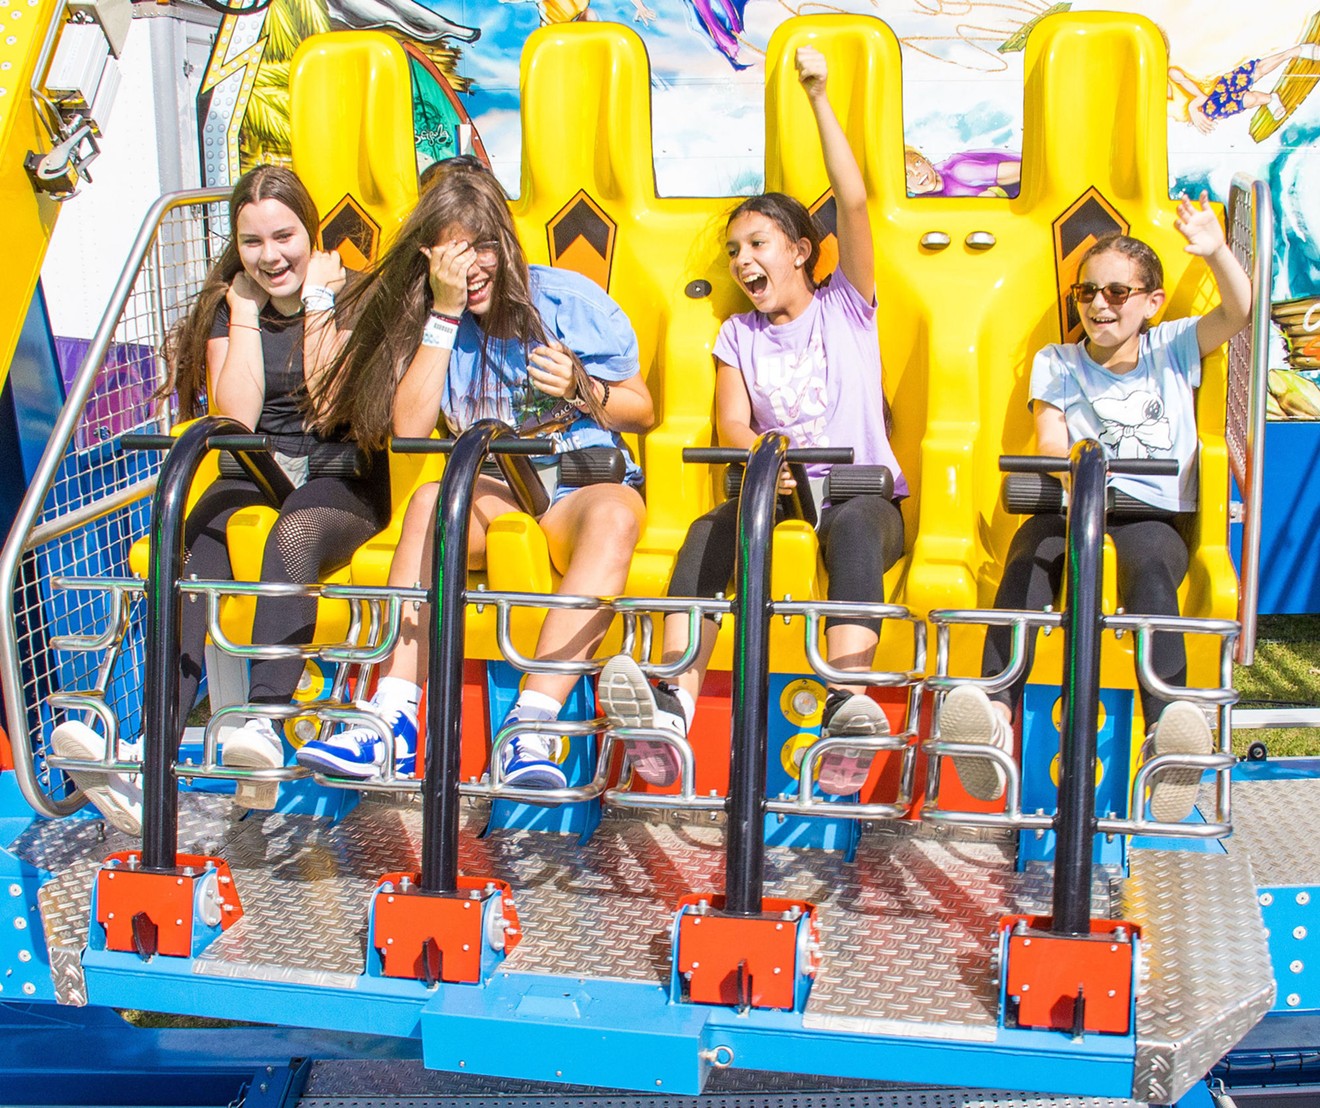 The Youth Fair is back March 14-April 7 with plenty of rides, food, performances, and more.